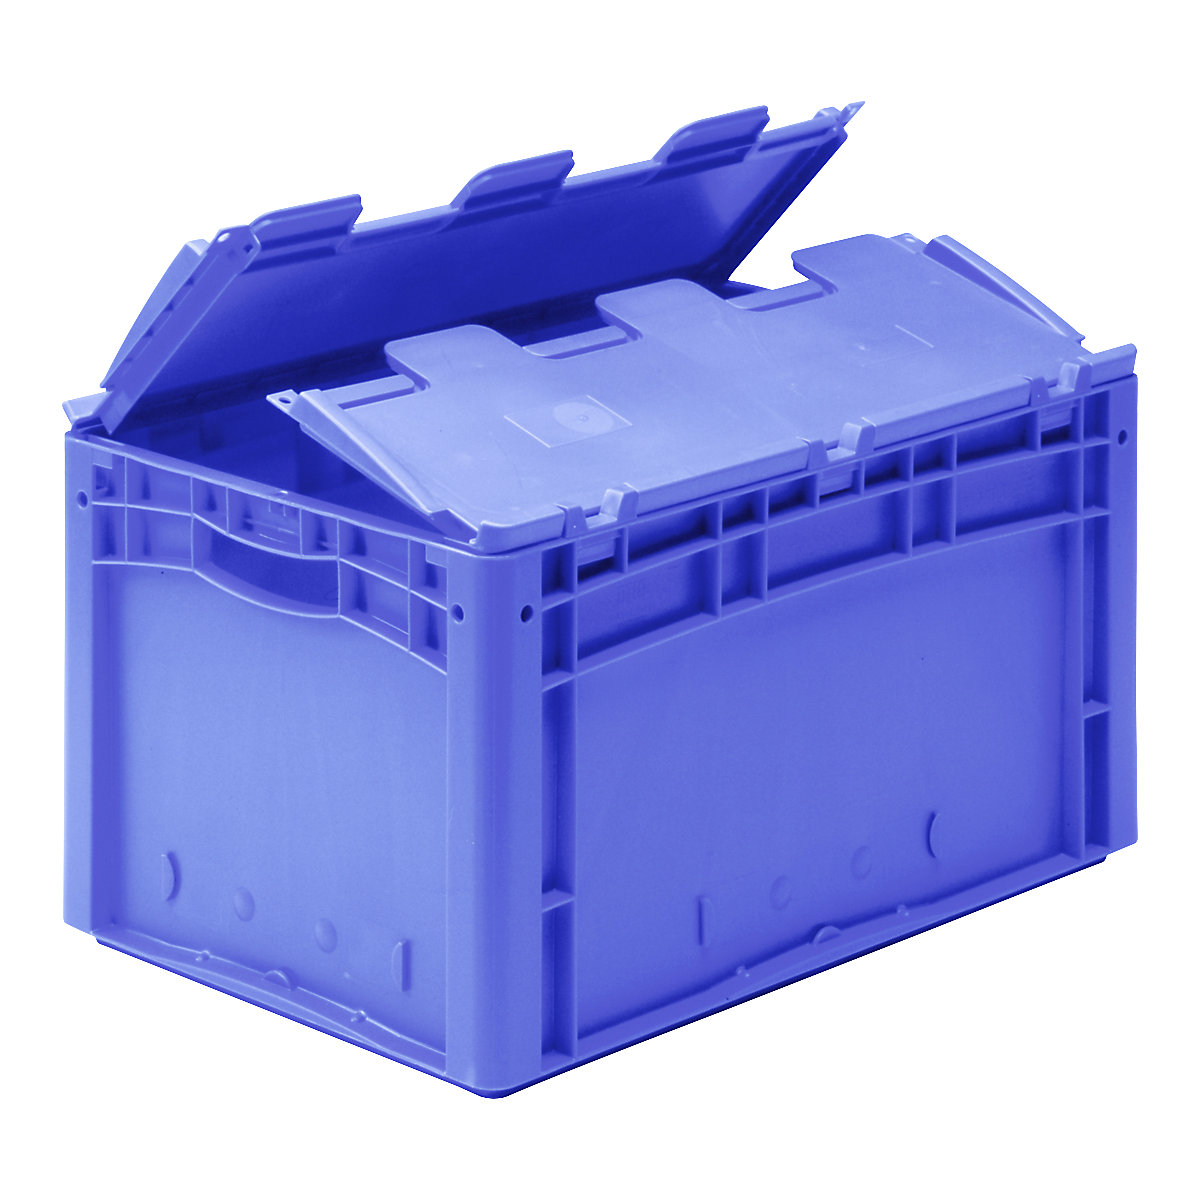 XL Euro stacking container – BITO, with 2-section hinged lid, LxWxH 300 x 200 x 188 mm-14